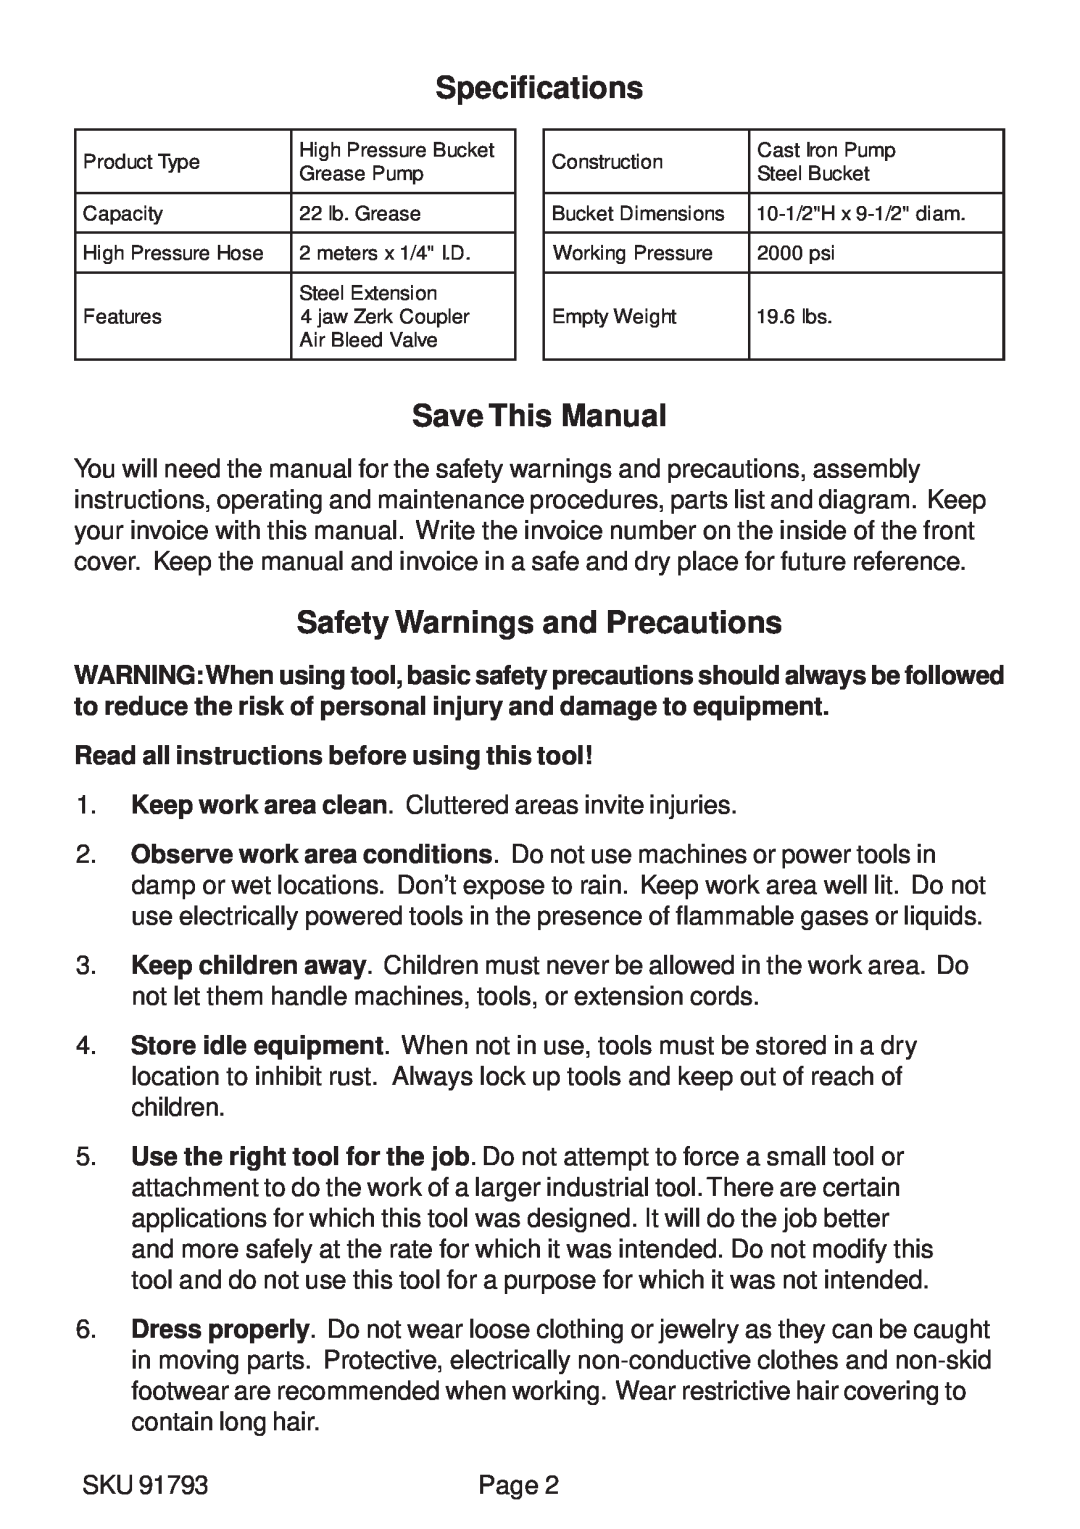 Harbor Freight Tools 91793 manual Specifications, Save This Manual, Safety Warnings and Precautions 